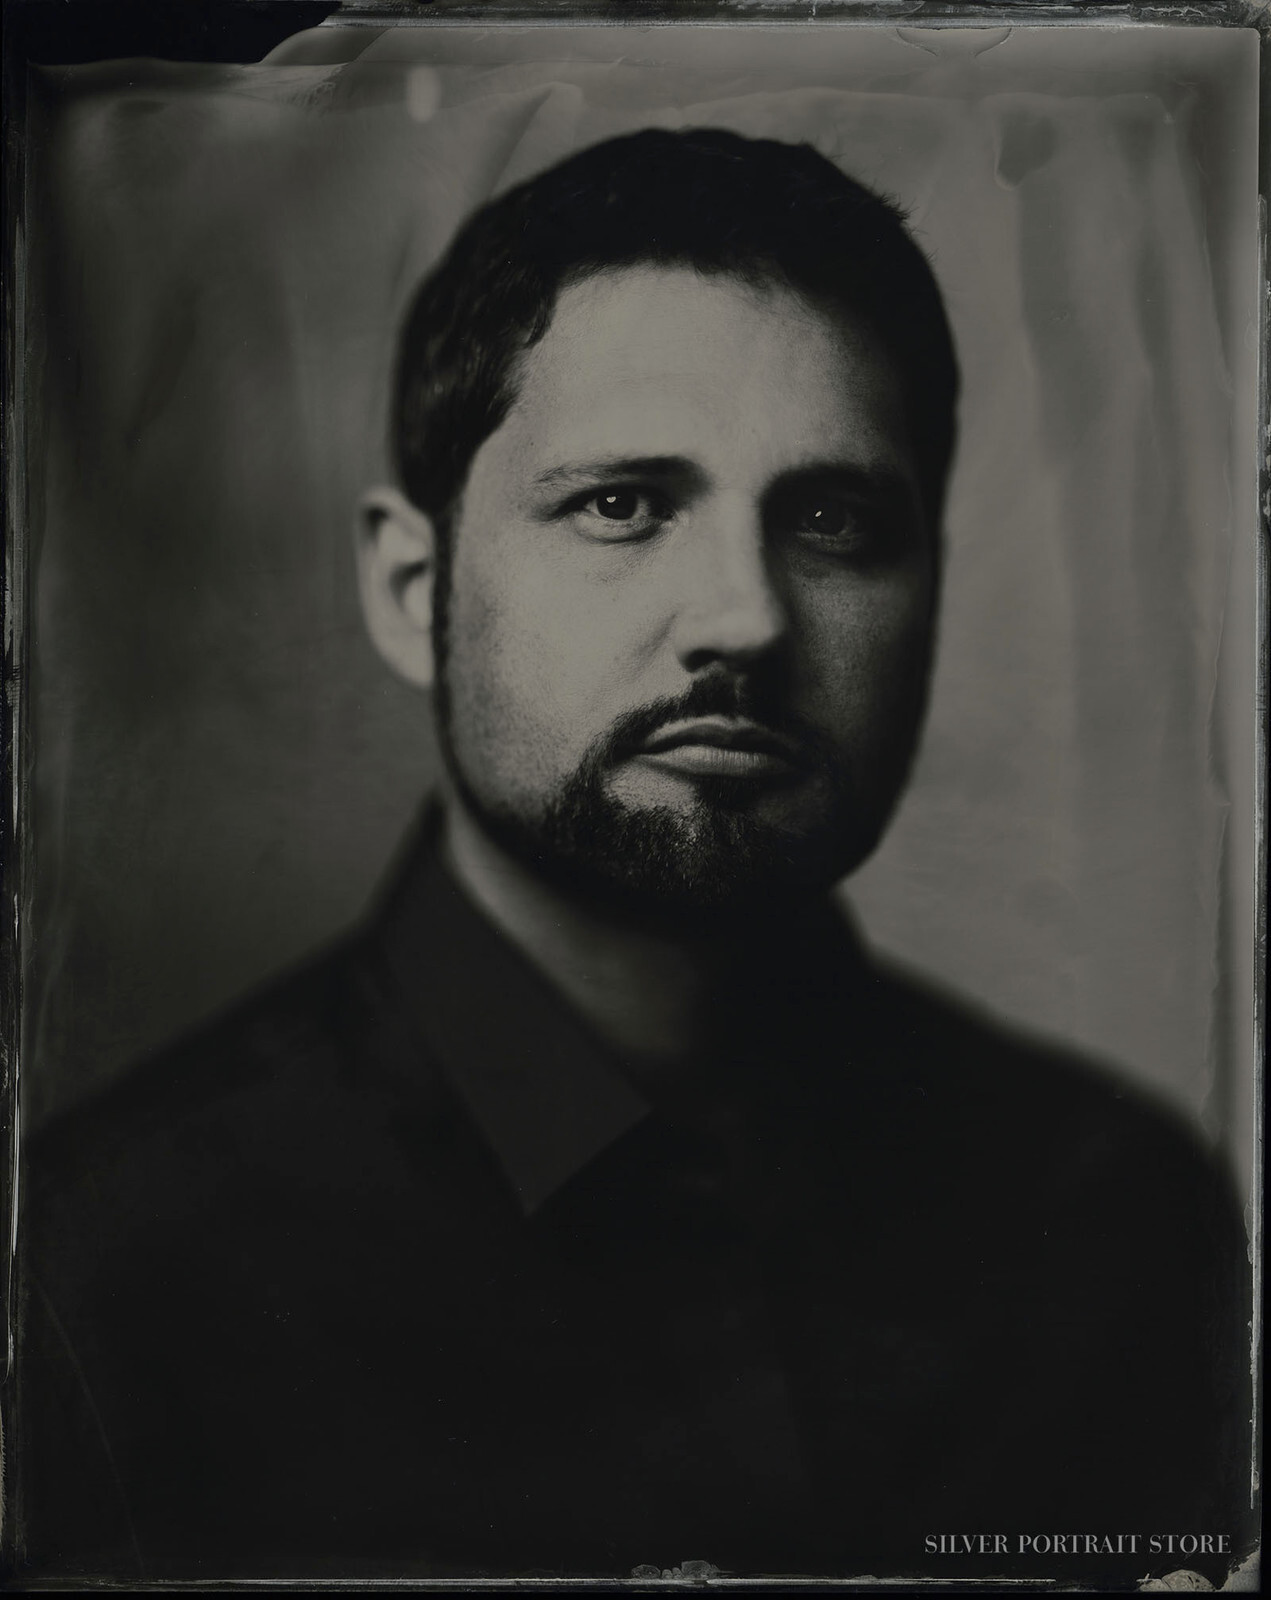 Cody-Silver Portrait Store-Wet plate collodion-Tintype 20 x 25 cm.